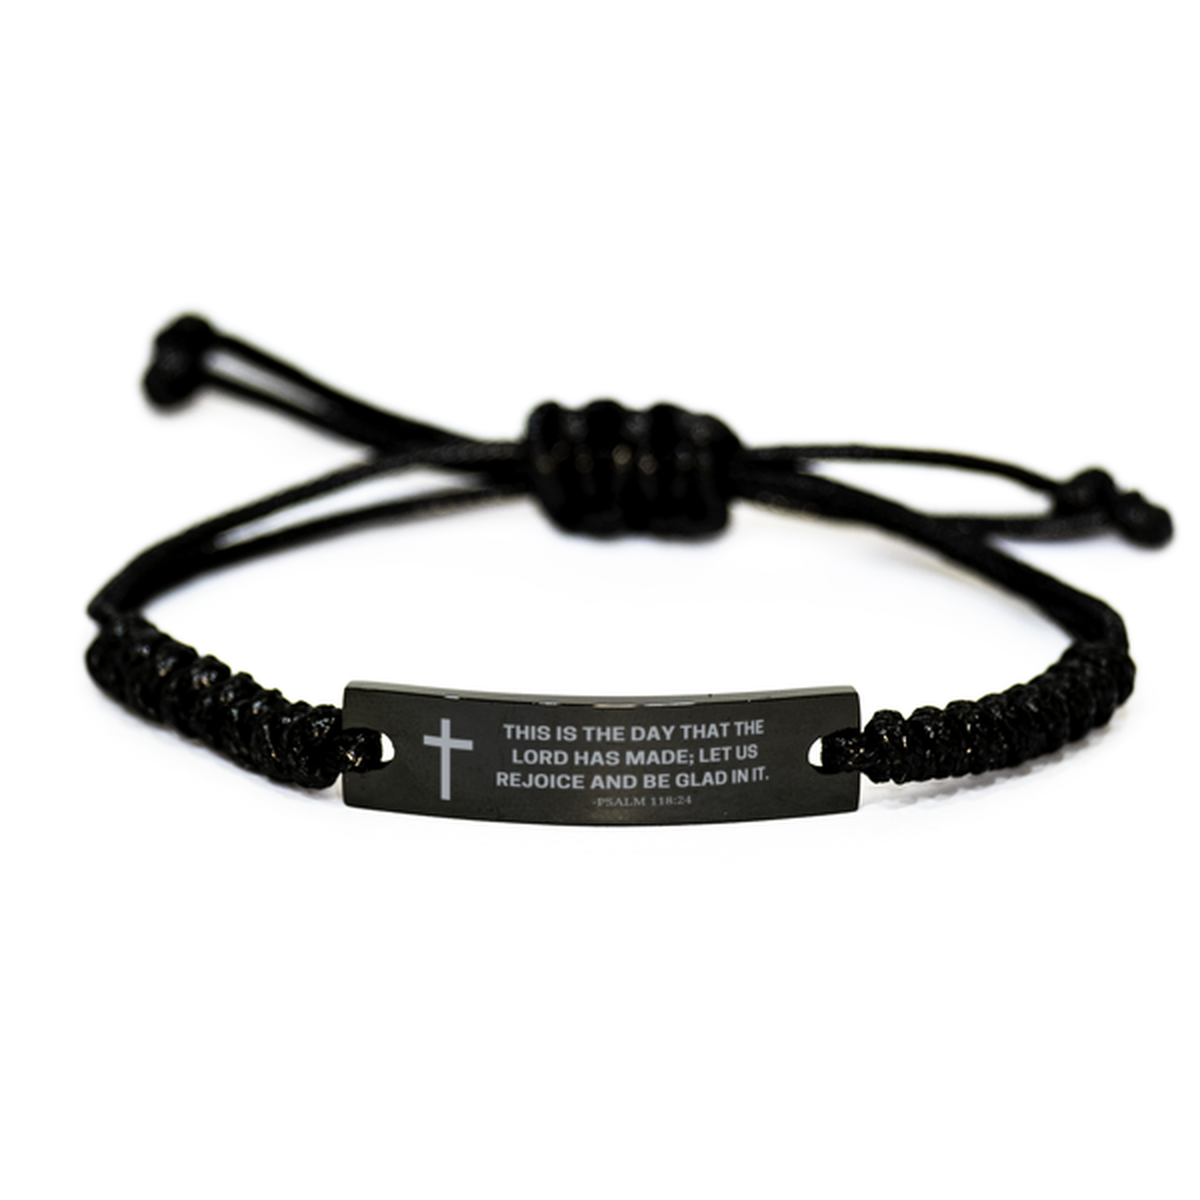 Baptism Gifts For Teenage Boys Girls, Christian Bible Verse Black Rope Bracelet, This is the day that the lord has made, Catholic Confirmation Gifts for Son, Godson, Grandson, Nephew